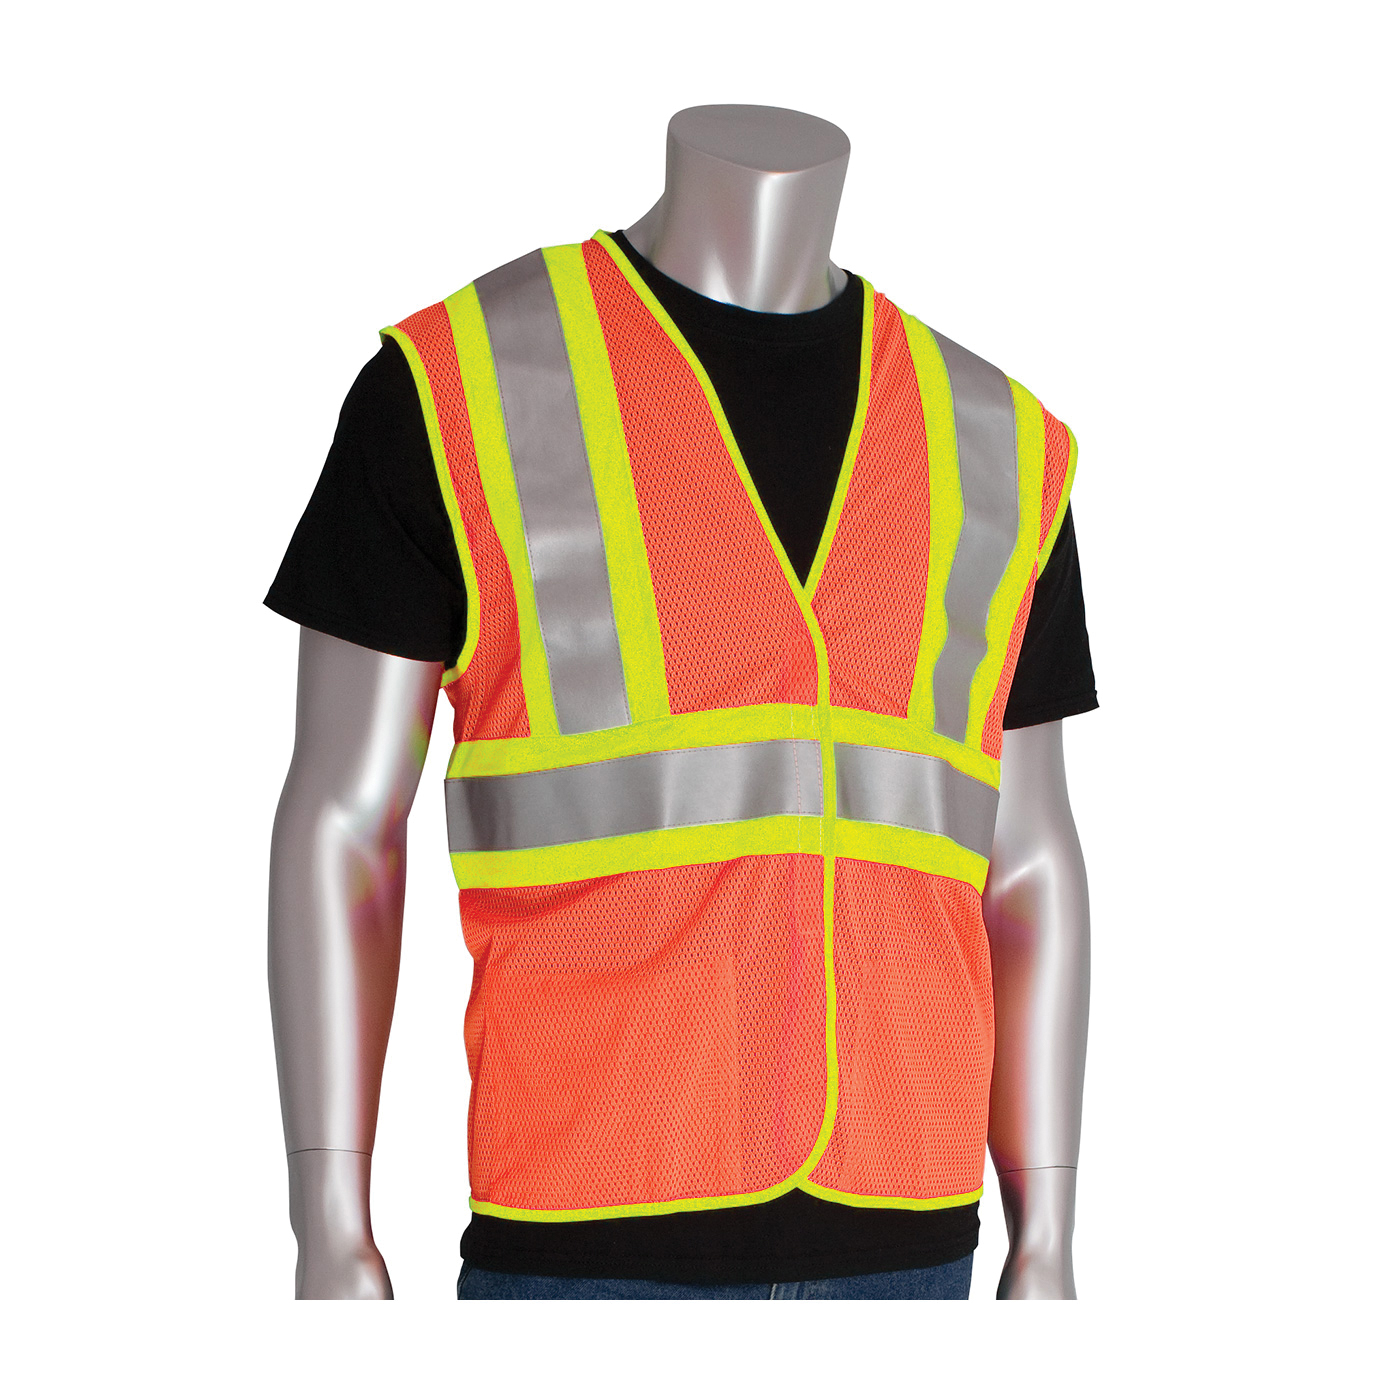 PIP® 305-MVFROR-S/M 2-Tone FR Treated Safety Vest, S to M, Hi-Viz Orange, Polyester, Hook and Loop Closure, 2 Pockets, ANSI Class: Class 2, ANSI Specified